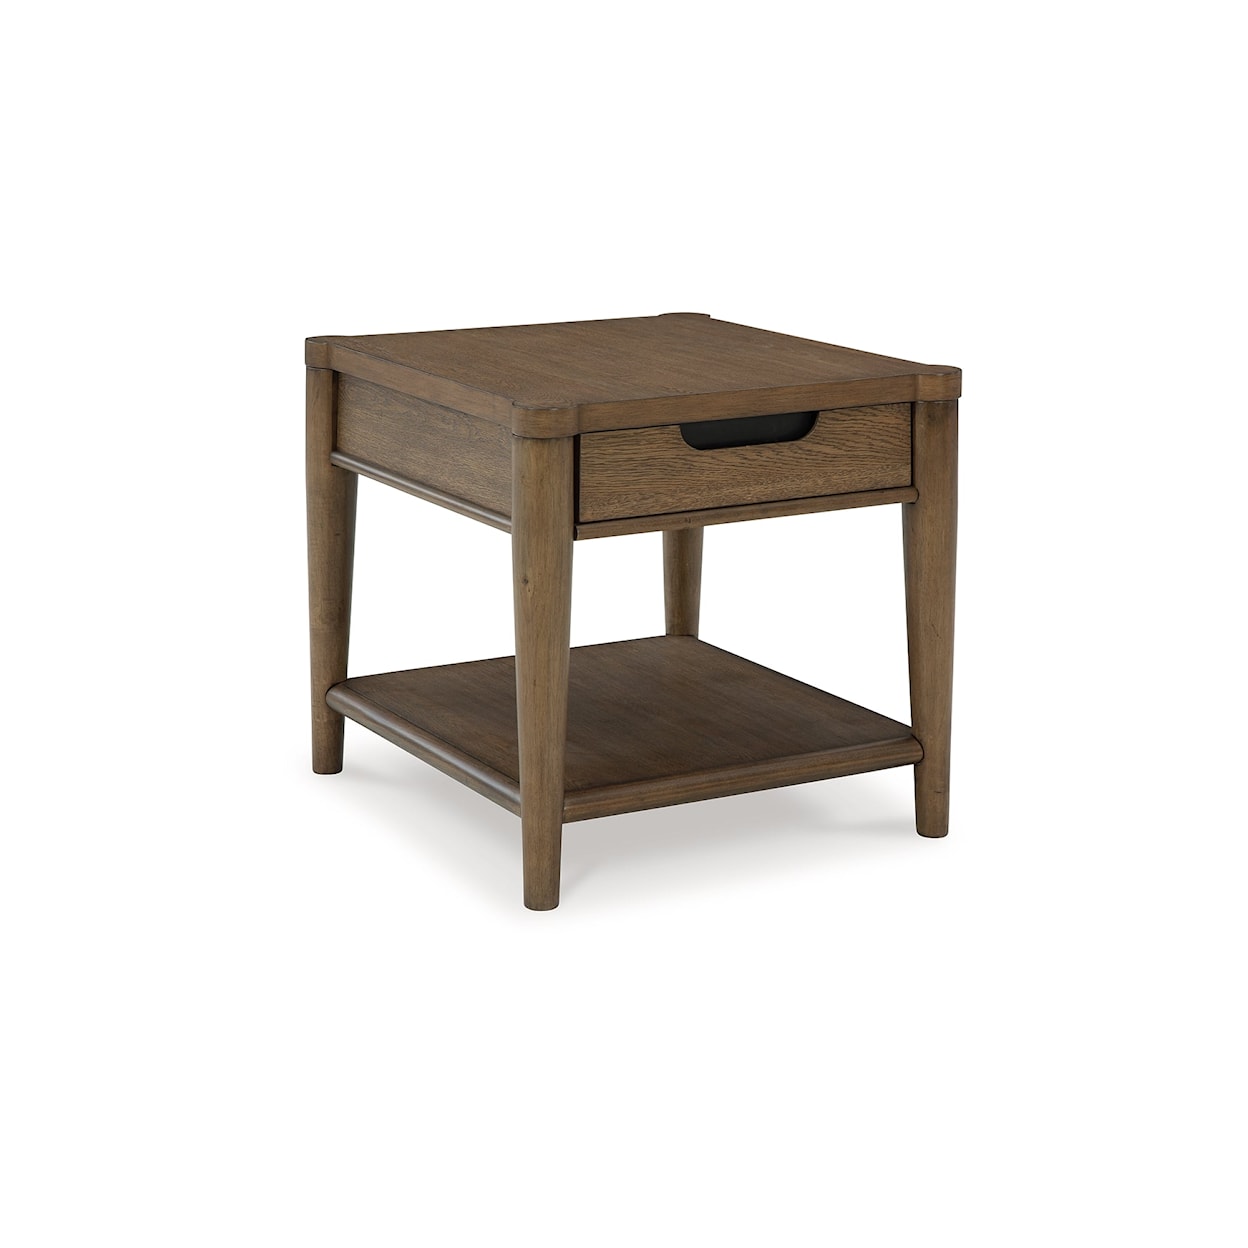 Ashley Signature Design Roanhowe Coffee Table and 2 End Tables